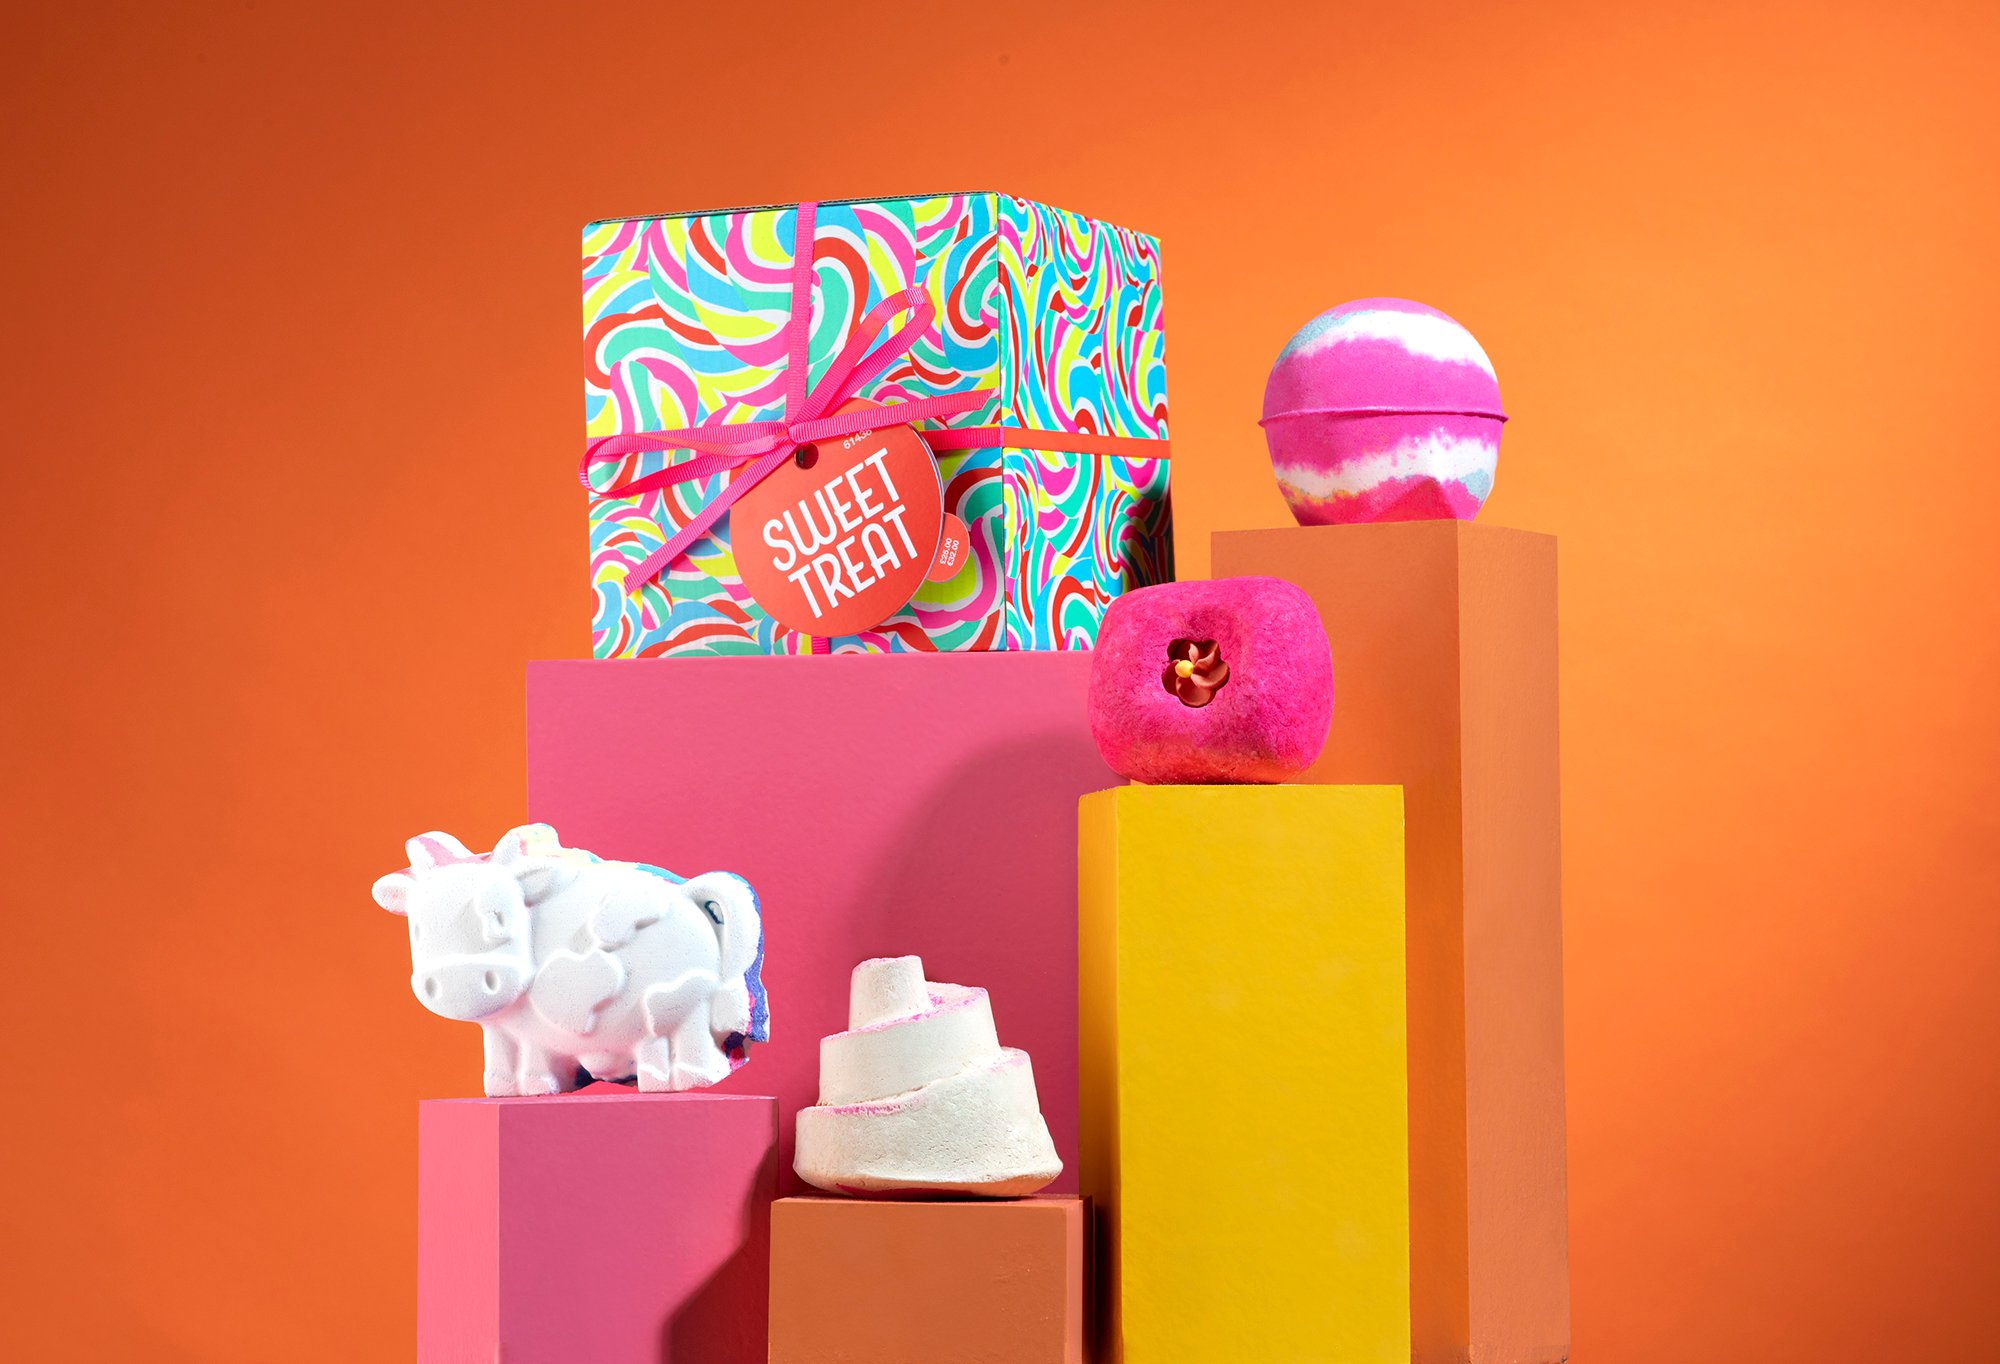 Sweet Treat gift, in front of an orange background, surrounded by its products on pink, orange and yellow plinths.